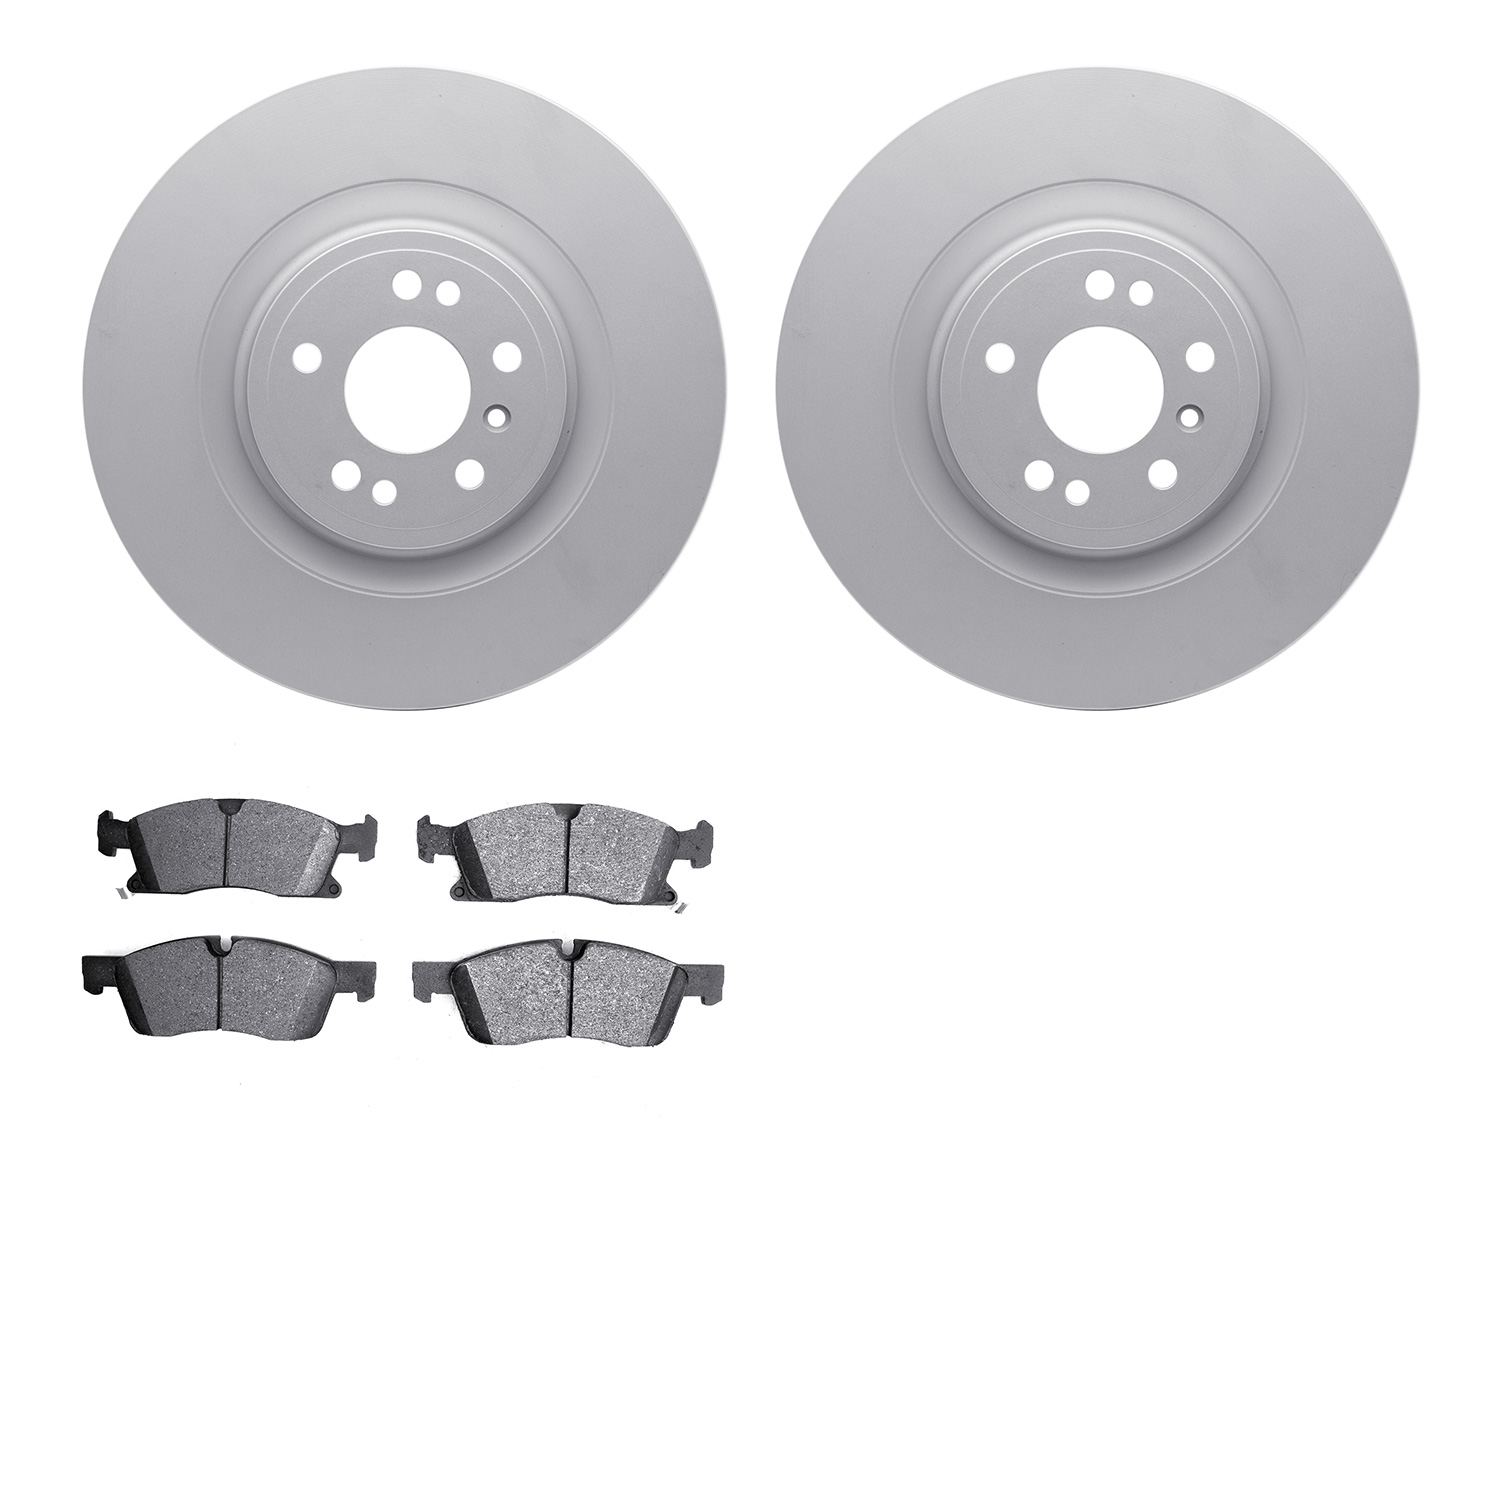 4402-63002 Geospec Brake Rotors with Ultimate-Duty Brake Pads Kit, 2013-2019 Mercedes-Benz, Position: Front